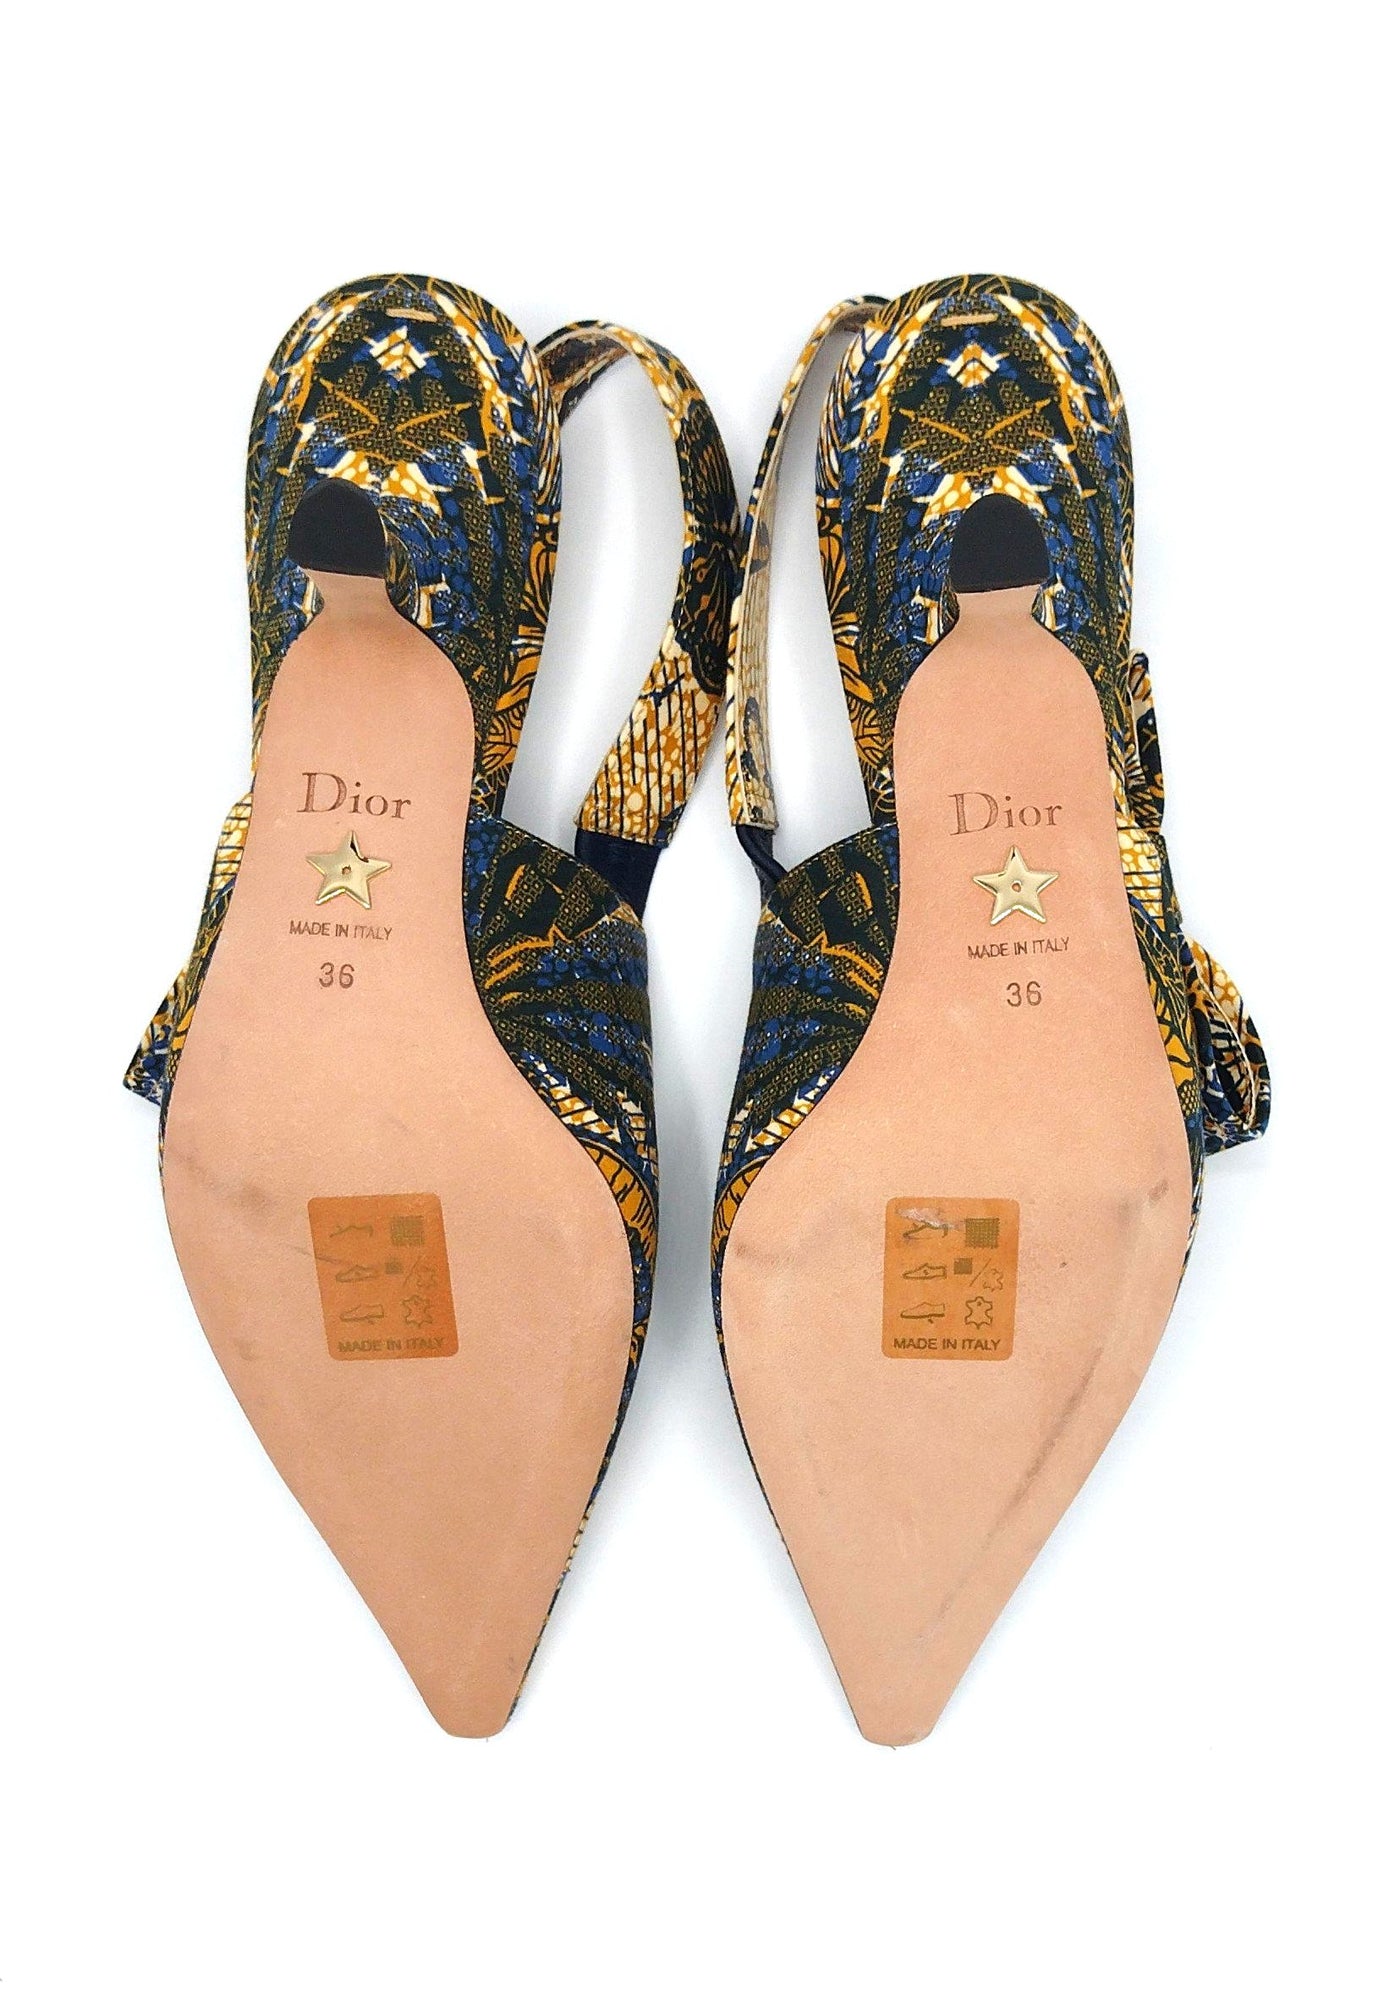 CHRISTIAN DIOR cruise 2020 Sweet D sling back size 36 never worn RRP: £850